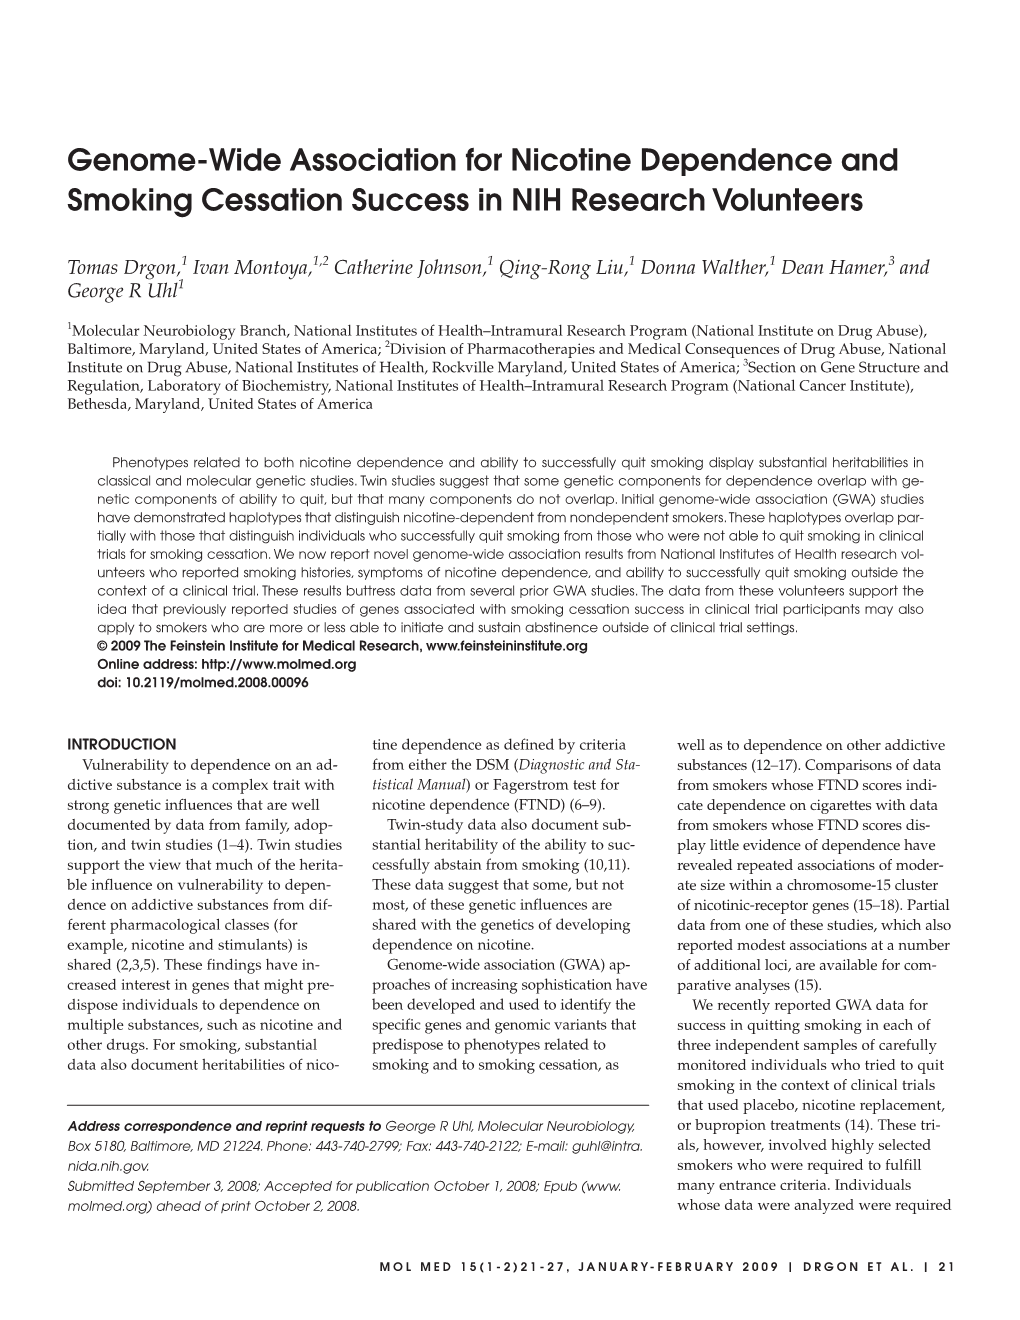 Genome-Wide Association for Nicotine Dependence and Smoking Cessation Success in NIH Research Volunteers